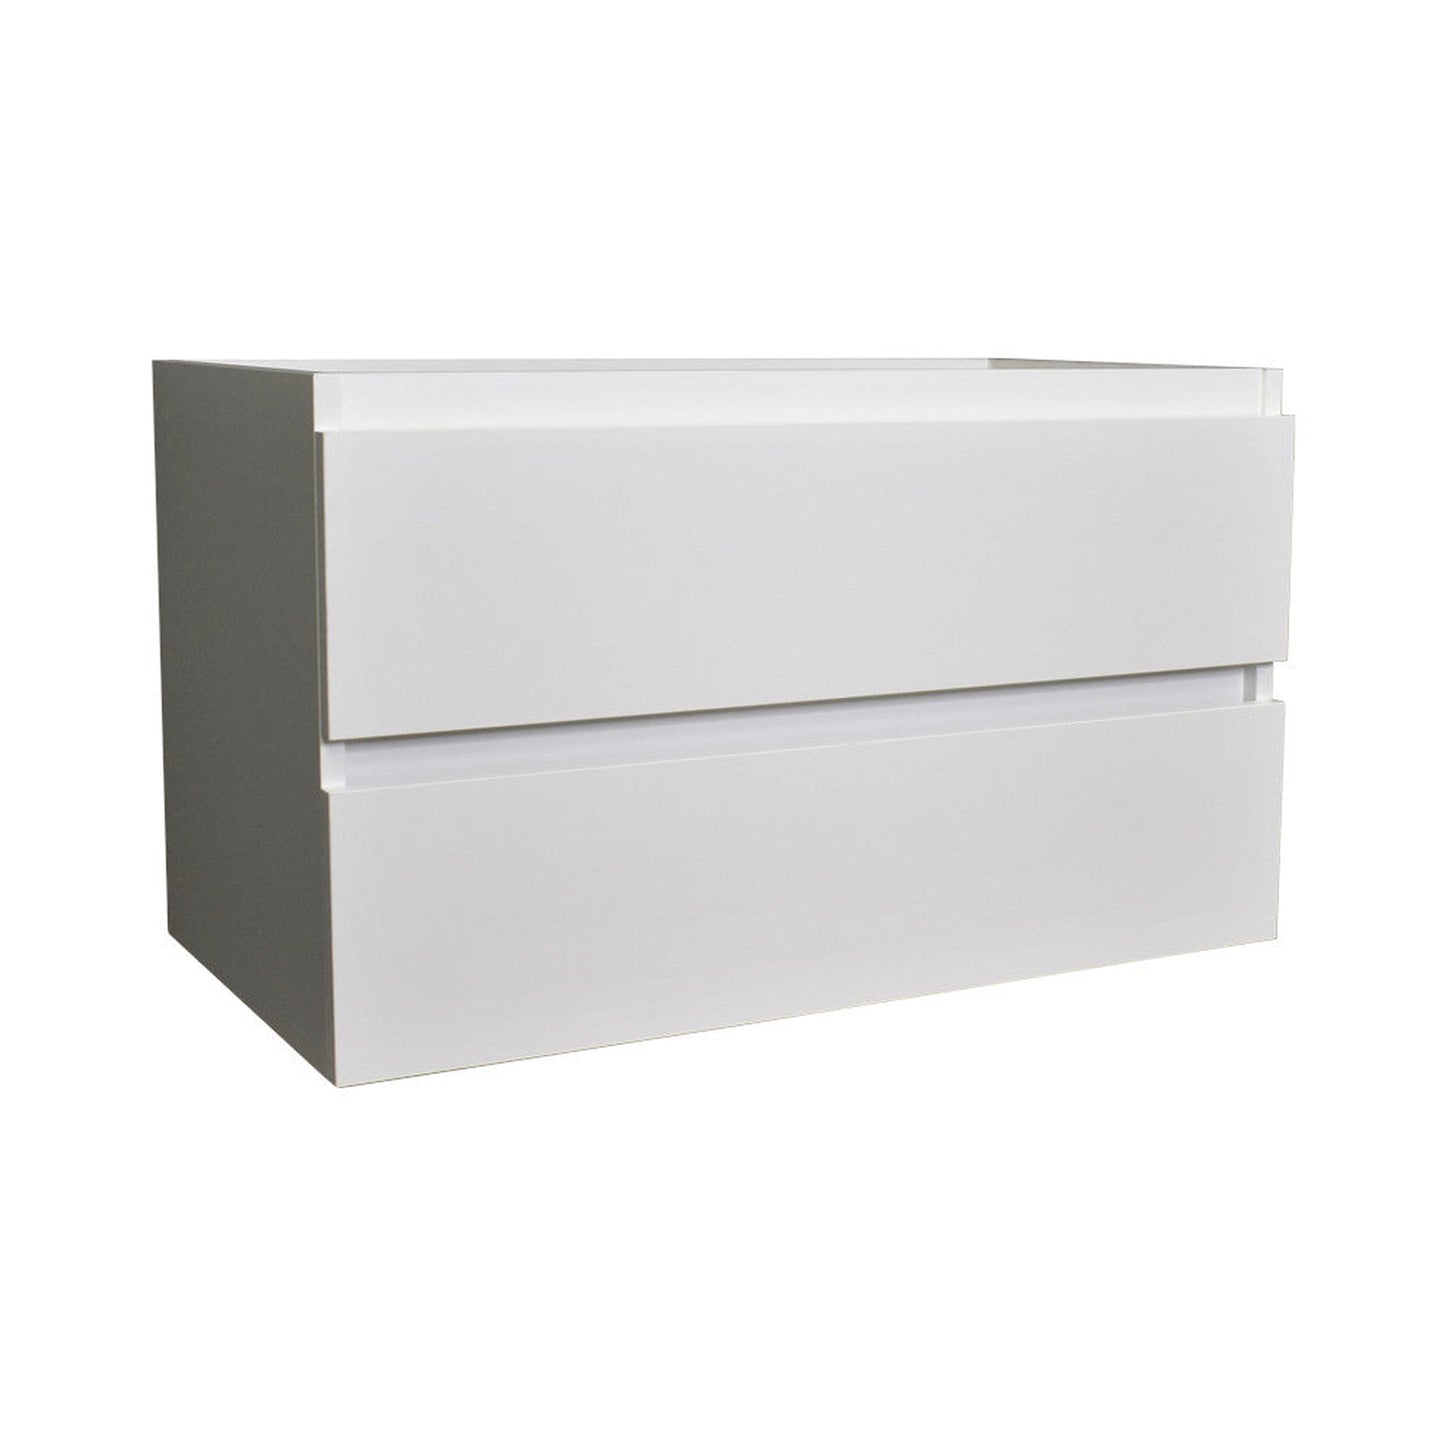 Volpa USA Salt 36" x 18" Glossy White Wall-Mounted Floating Bathroom Vanity Cabinet with Drawers